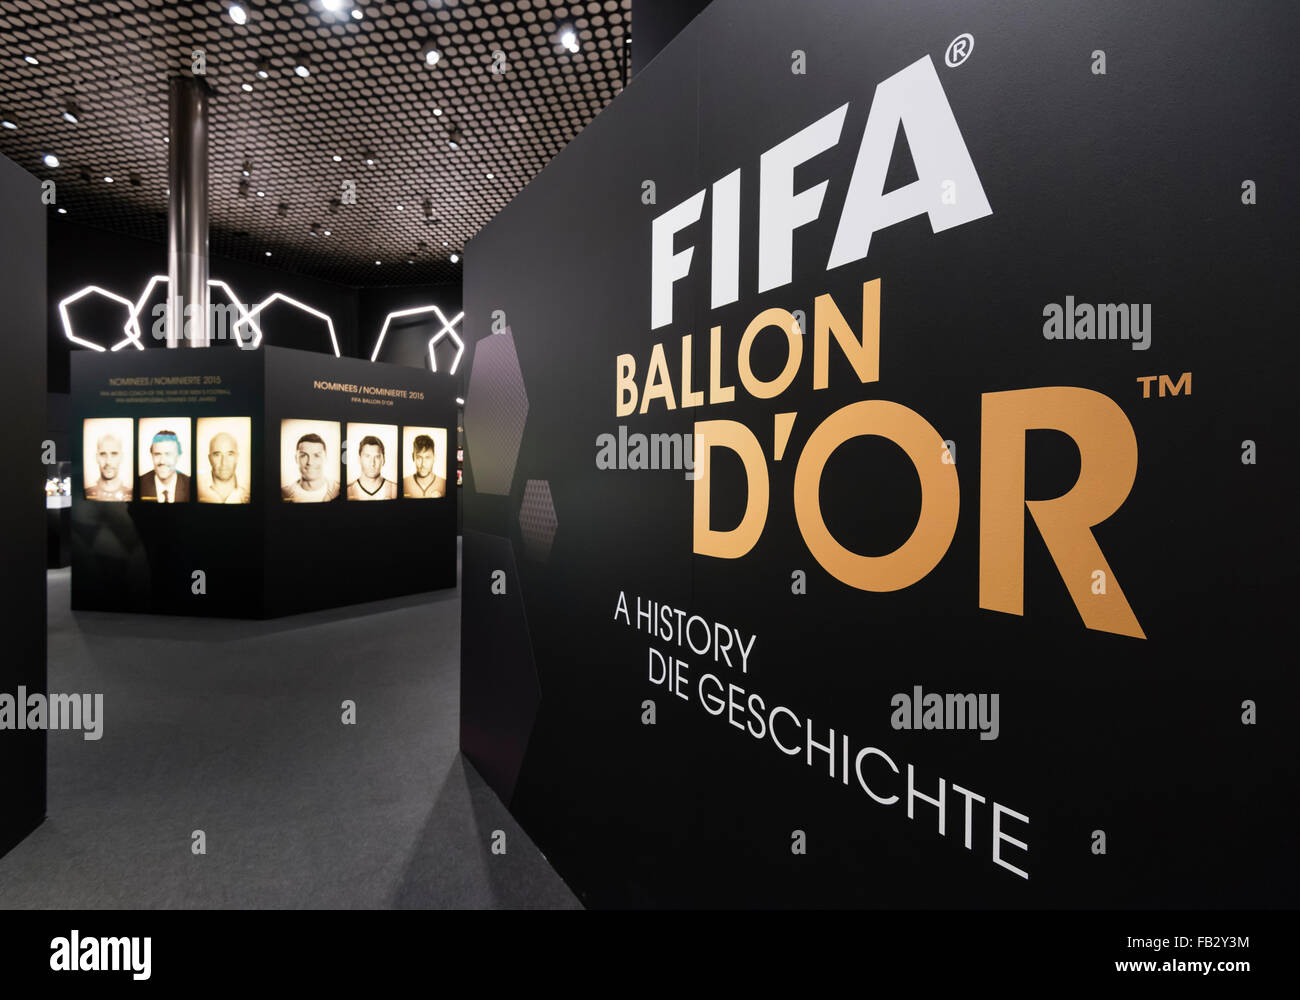 FIFA Ballon d'Or exhibition at the future new FIFA World Football Museum at  Zurich, Switzerland Stock Photo - Alamy